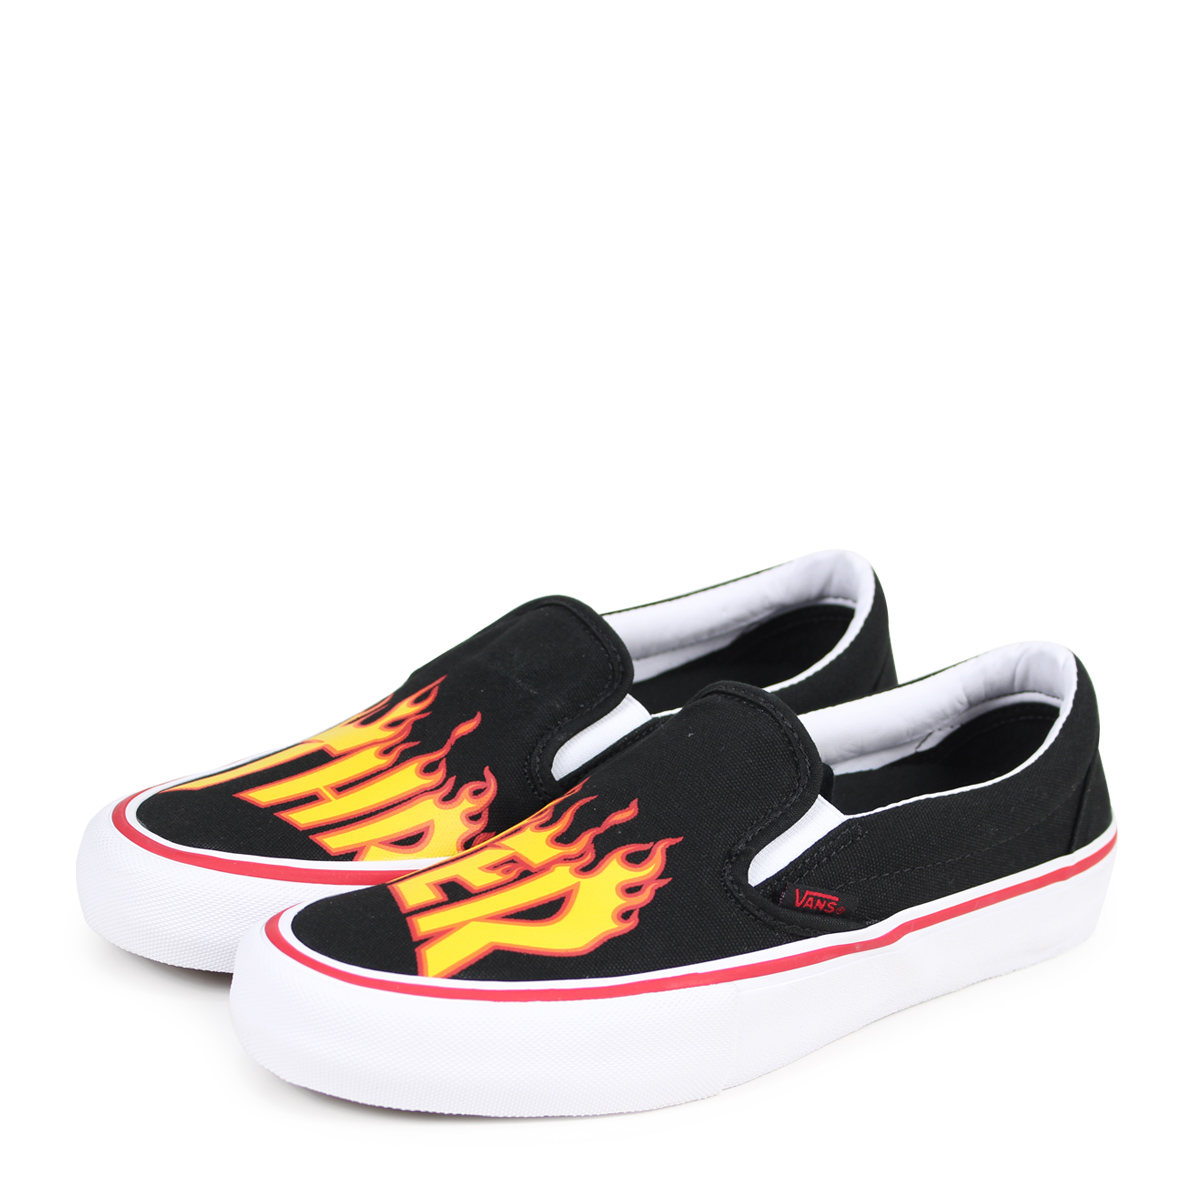 Parity > on vans thrasher, Up to 62% OFF